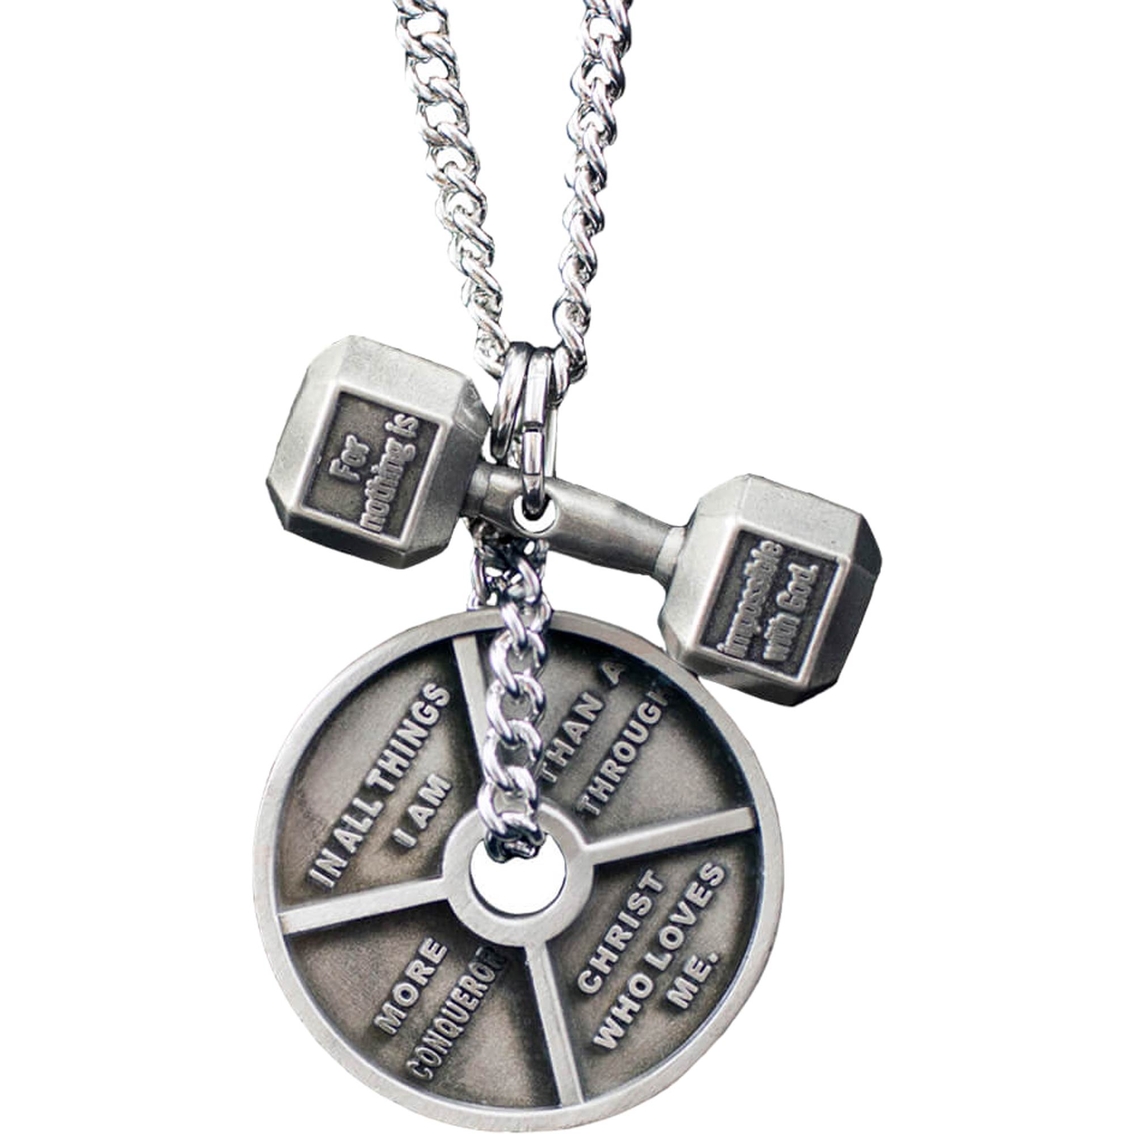 Shields of Strength Women's Antique Finish Combo Necklace, Phil 4:13/Luke 1:37 - Image 2 of 2